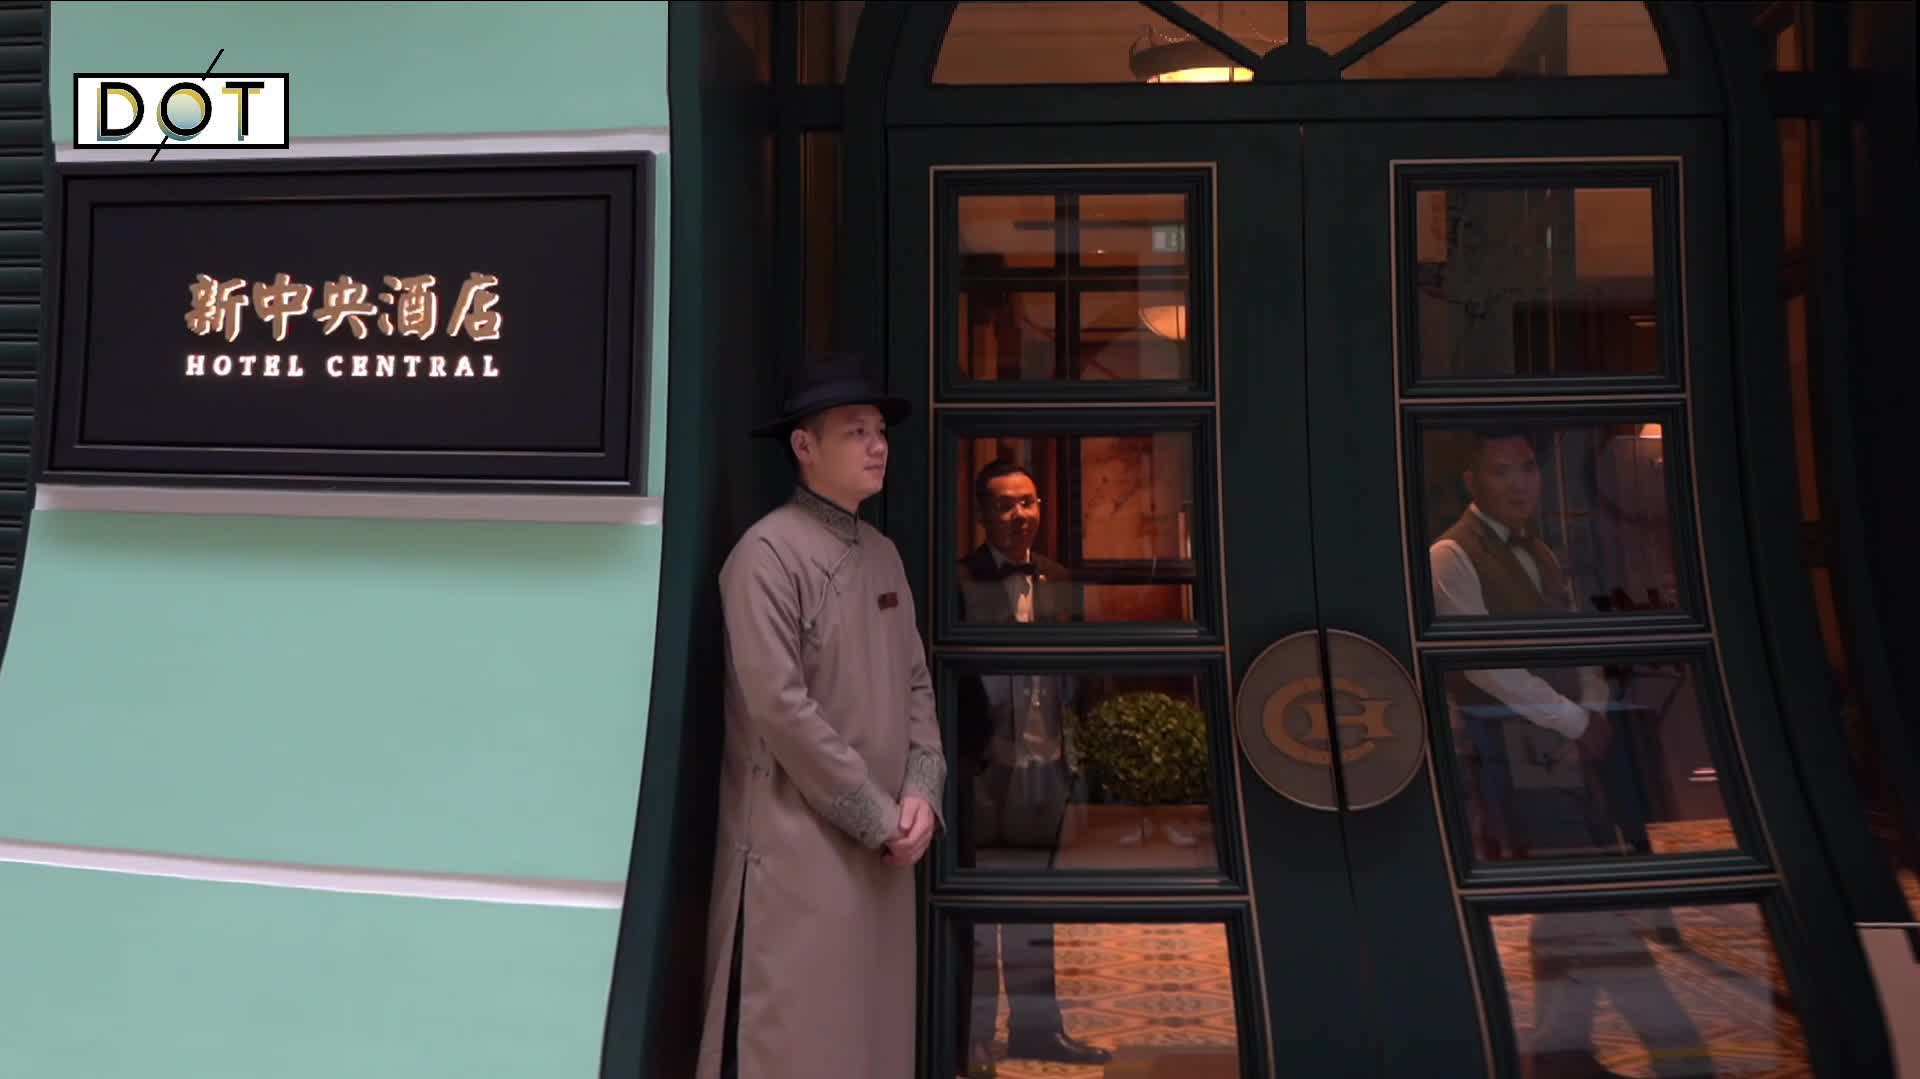 Watch This | Historic hotel in Macao's historic city center reopens as Hotel Central